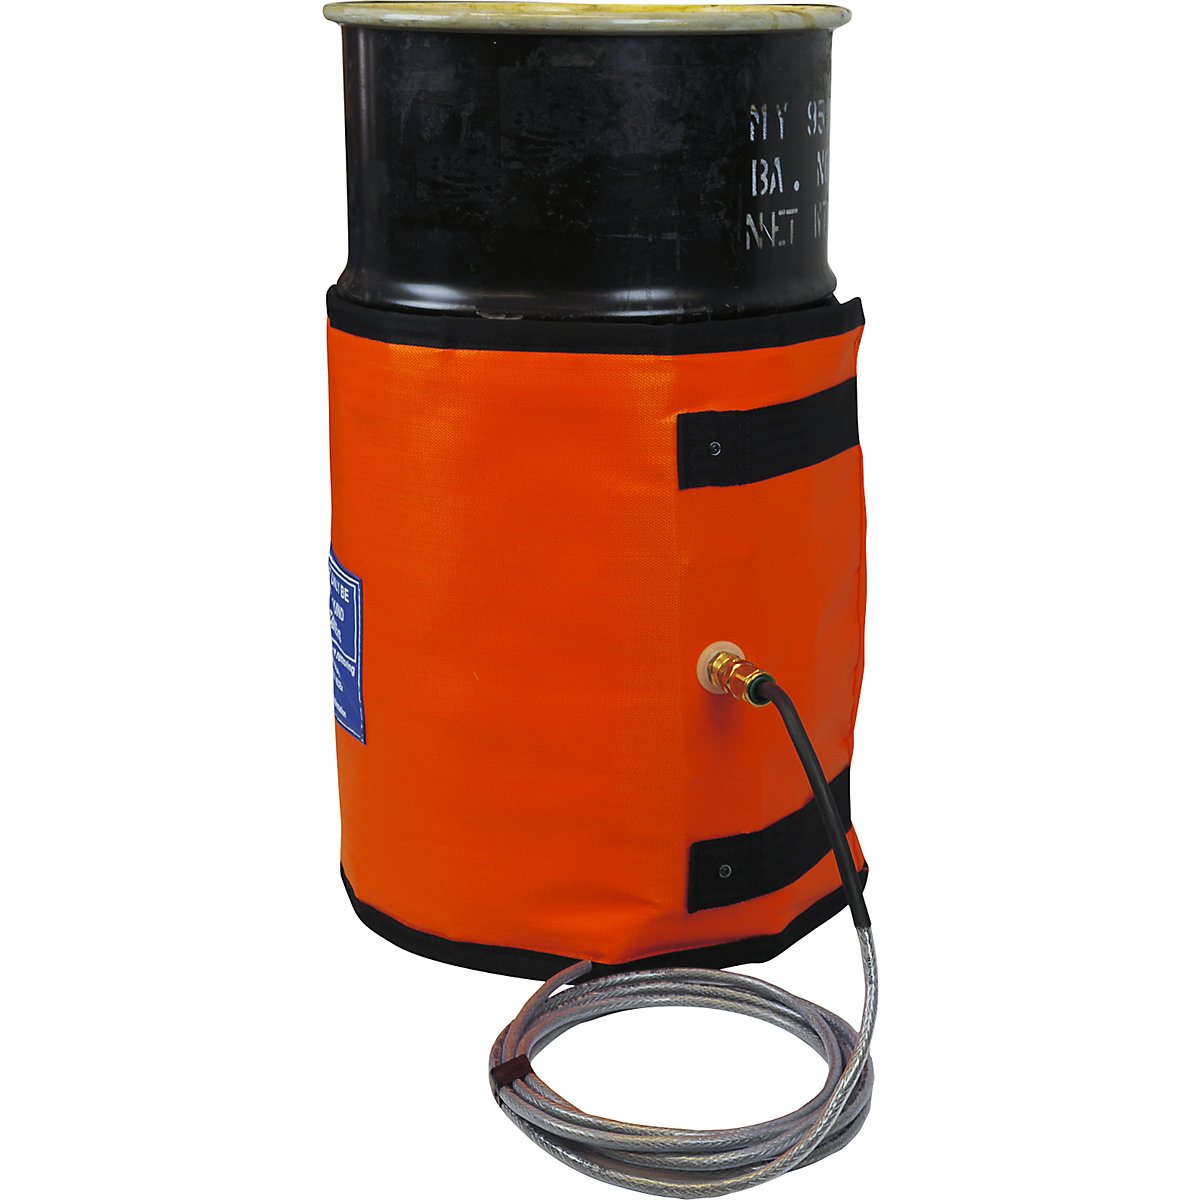 ECO ATEX canister/drum heating jacket